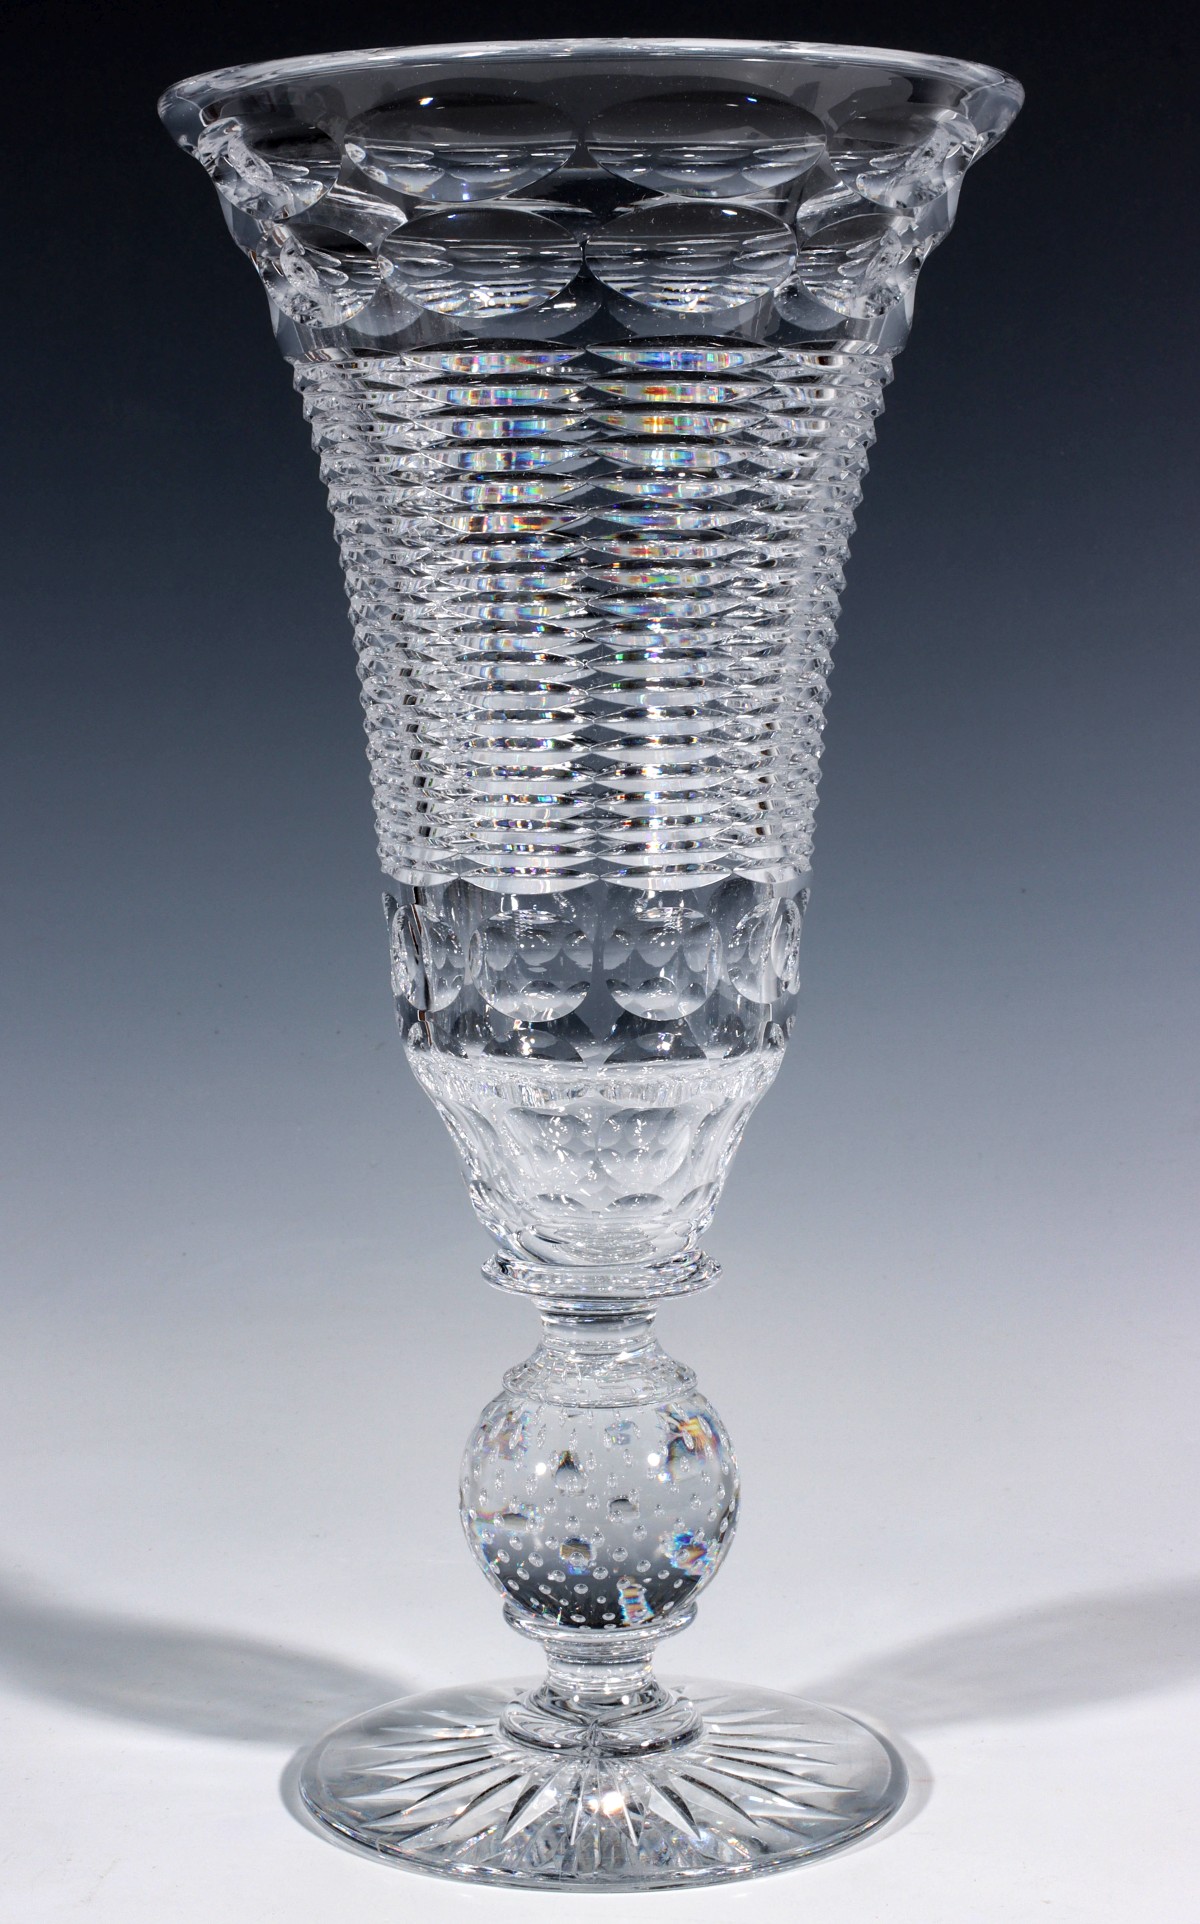 A PAIRPOINT TYRONE PATTERN VASE WITH CONTROL BUBBLE